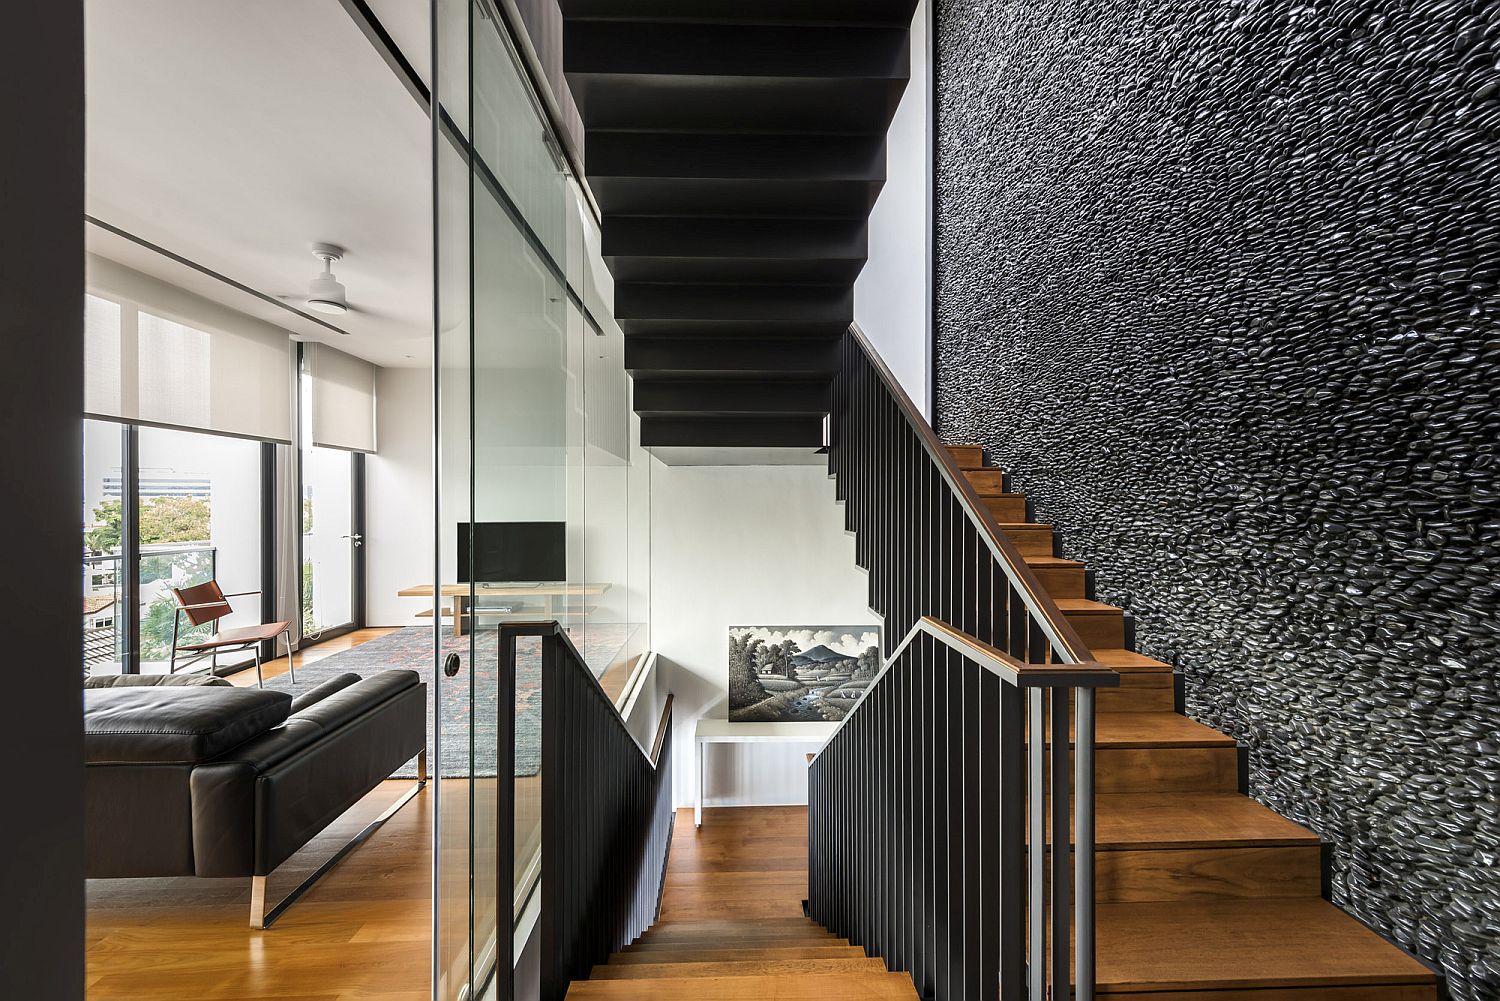 Wood-and-metal-staircase-connecting-the-multiple-levels-of-the-contemporary-home